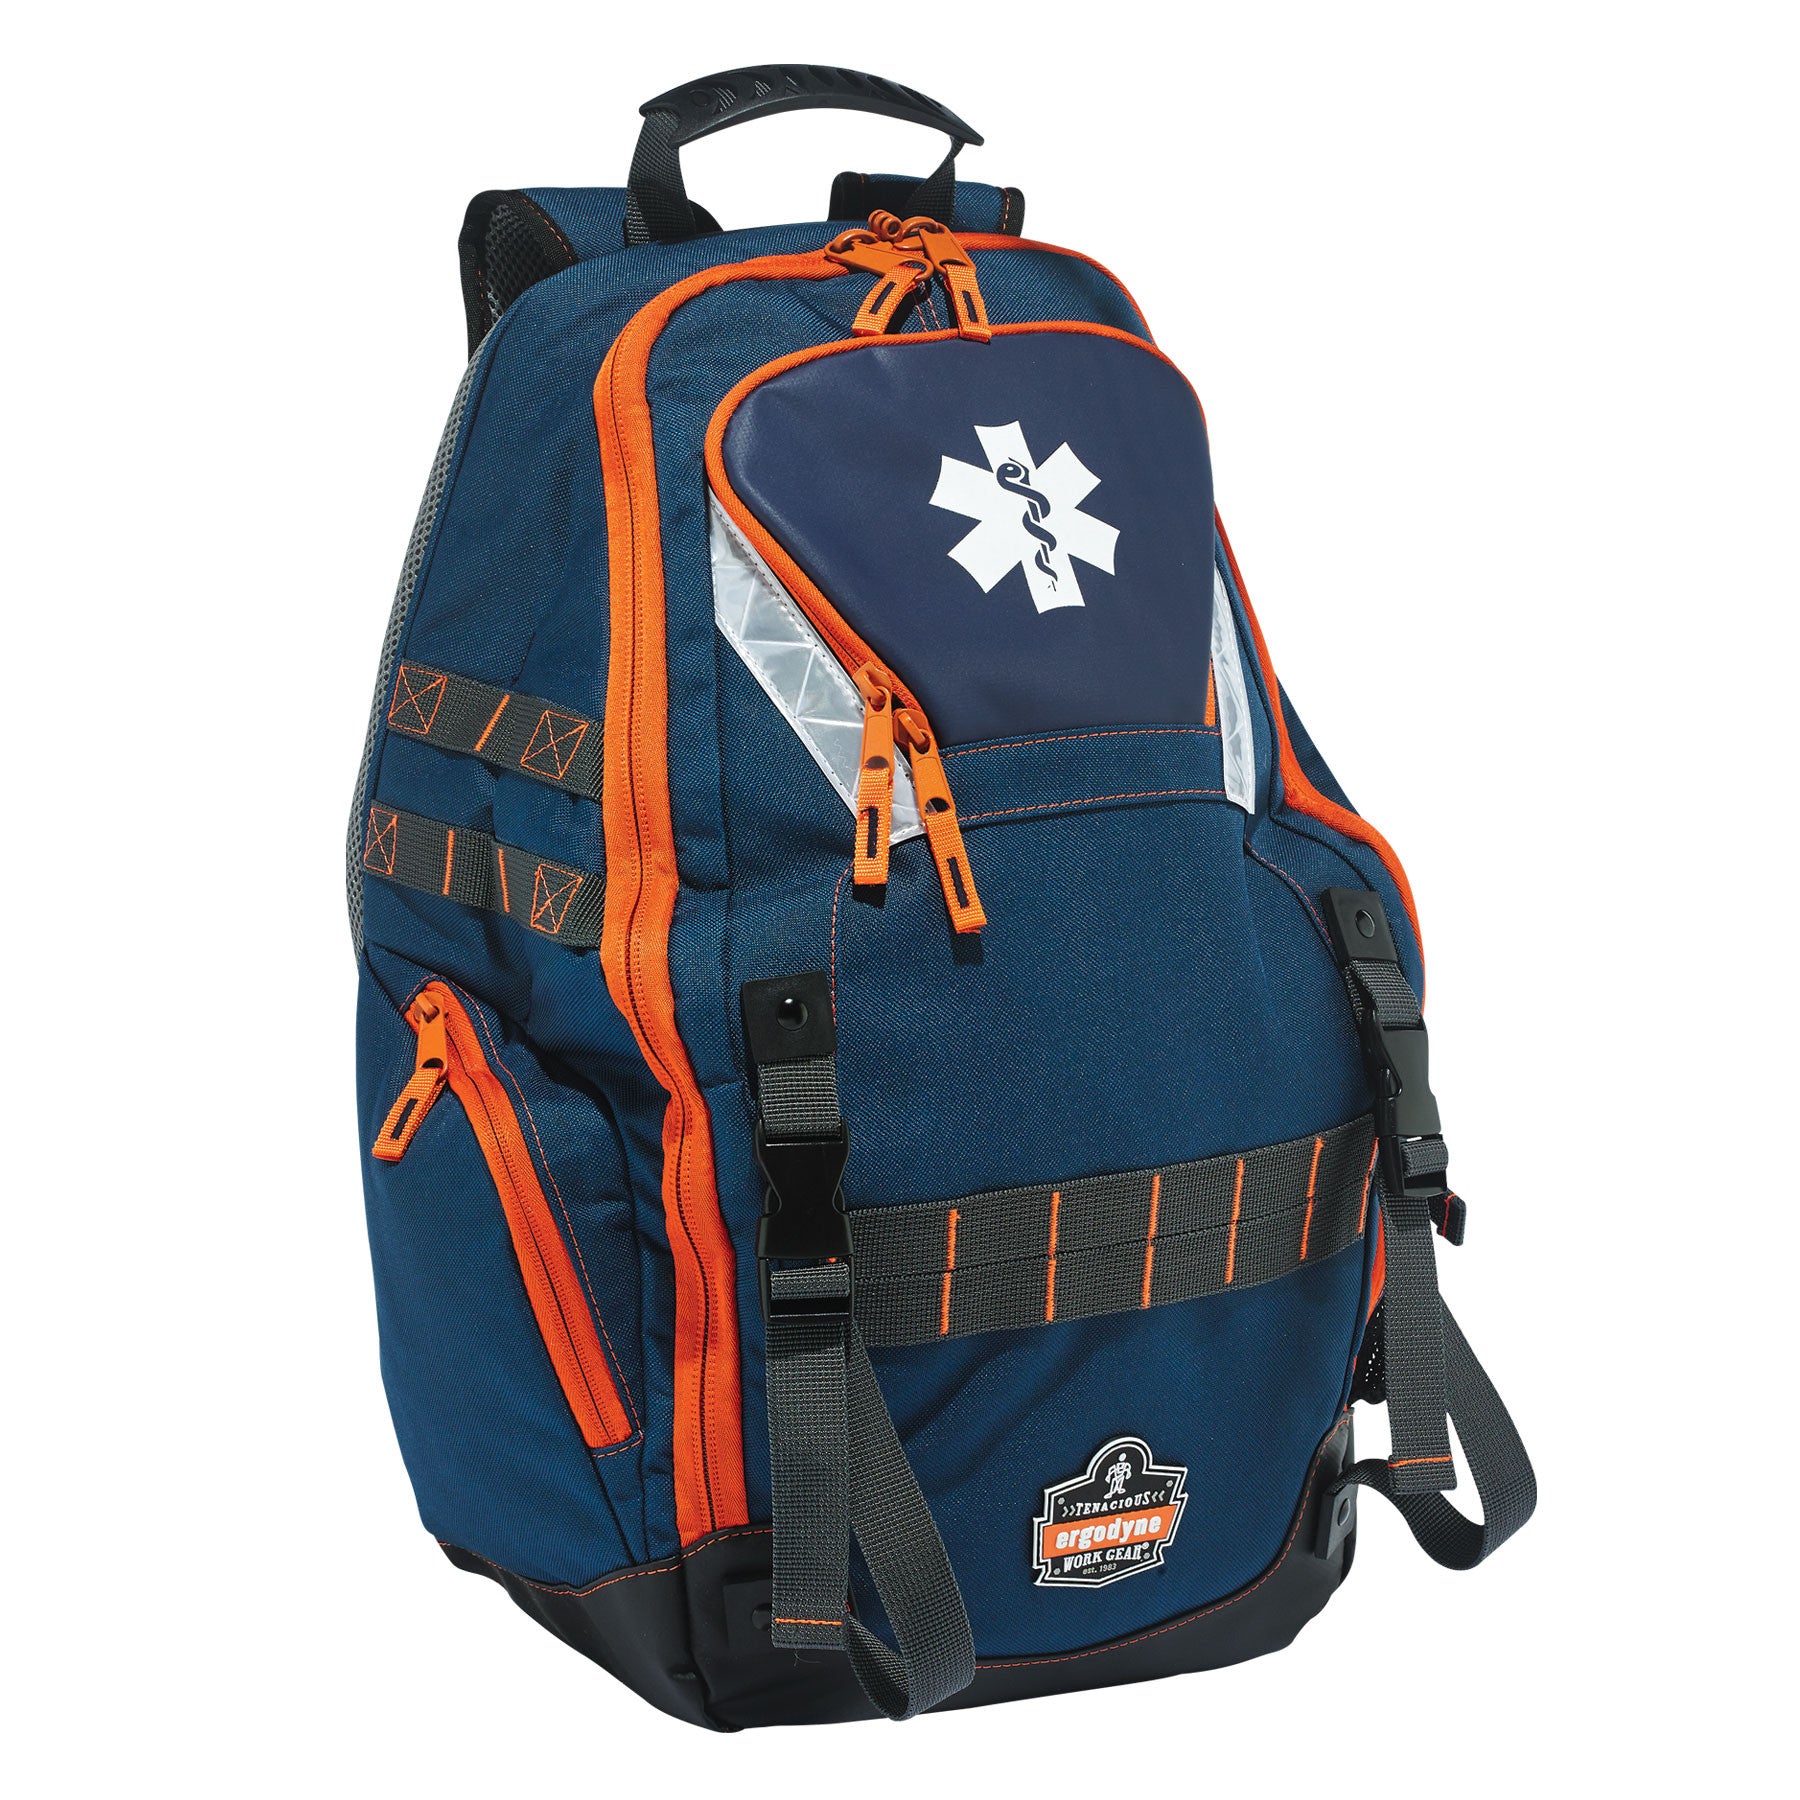 Arsenal 5244 Responder Backpack-eSafety Supplies, Inc